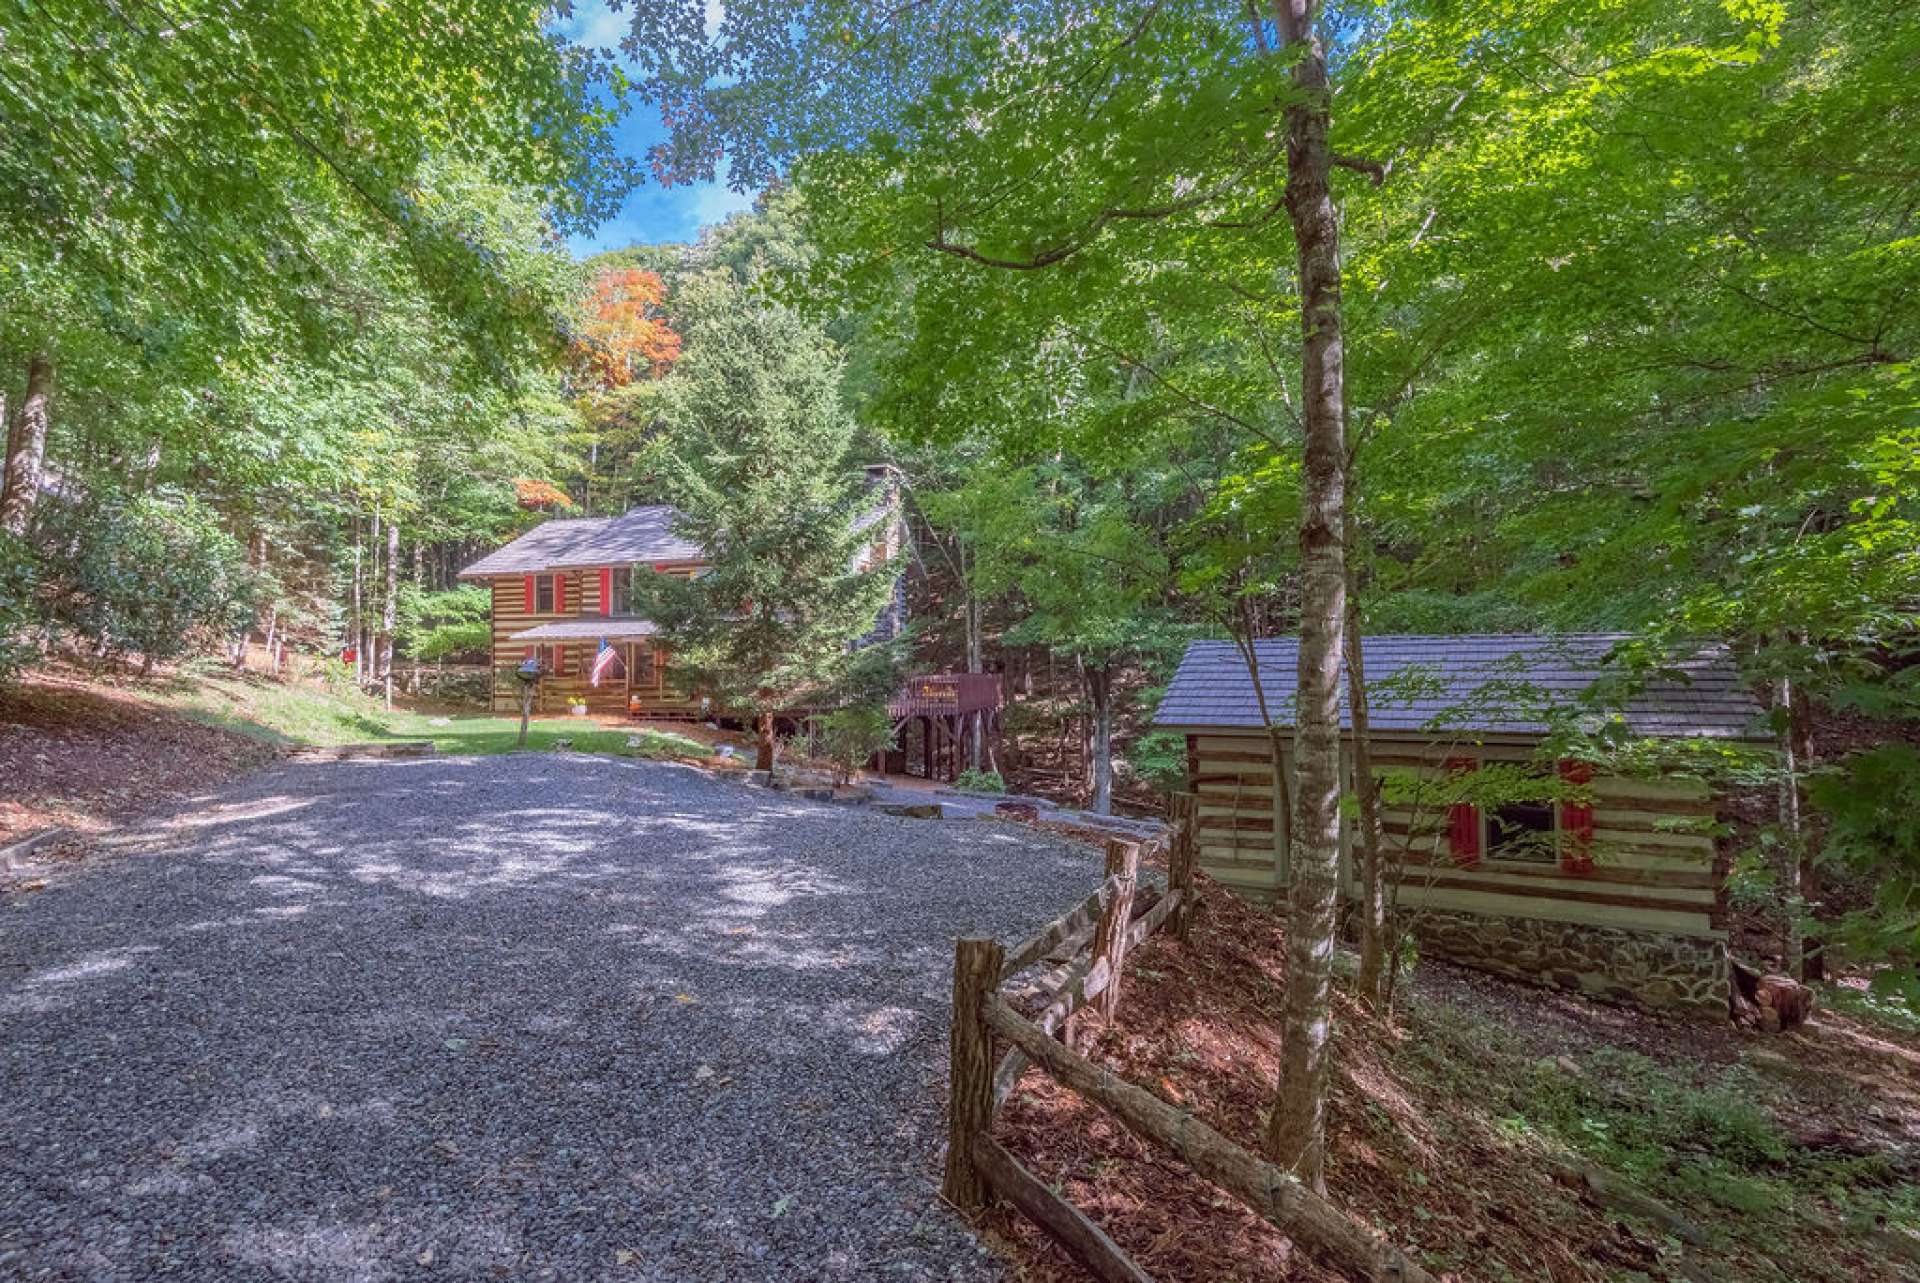 When entering the Stonebridge community and driving along  Homestead Road, canopied by natural mountain foliage,  you will encounter lovely stone bridges, split rail fences, and charming rustic log cabins tucked in beautifully landscaped settings enhanced by Nature.  This 3-bedroom, 2-bath log home is located at the end of a private drive offering privacy.